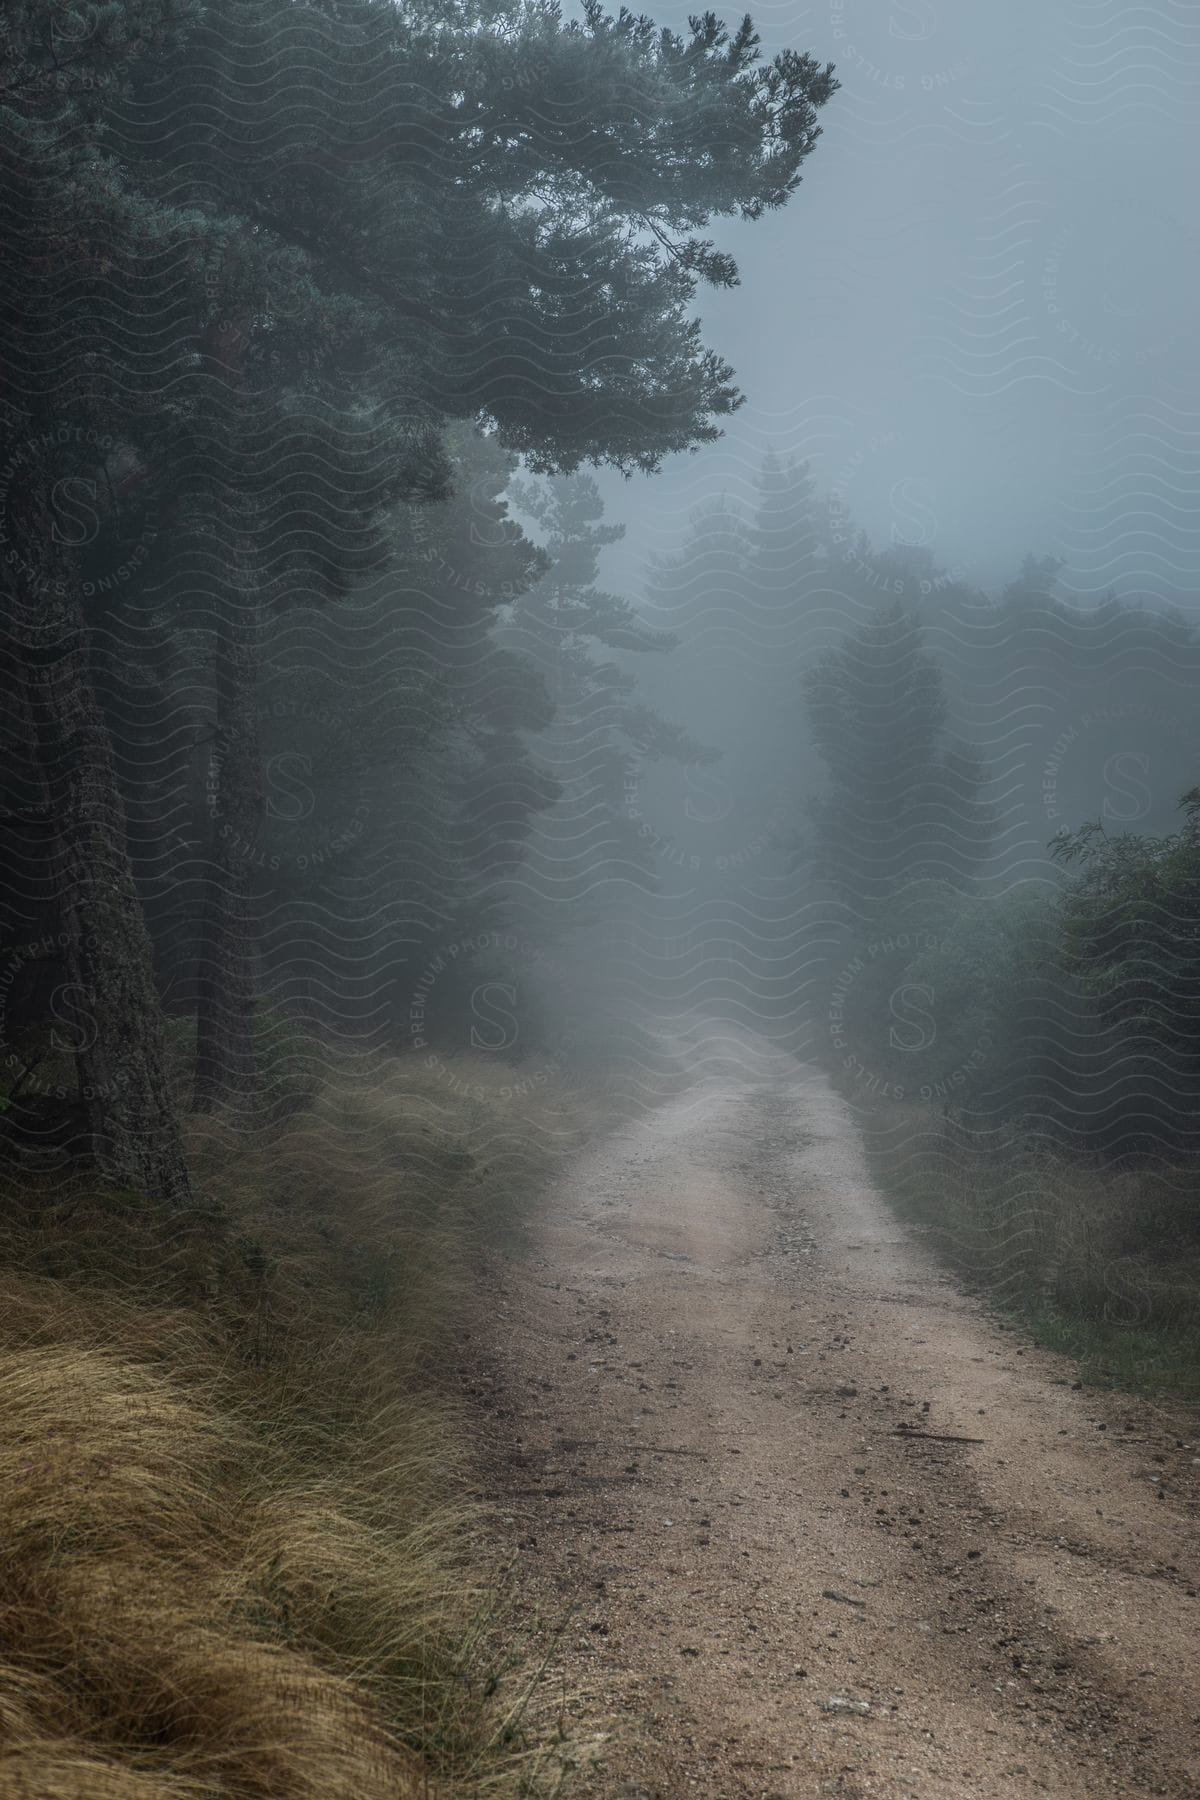 A dirt road leading into a foggy forest